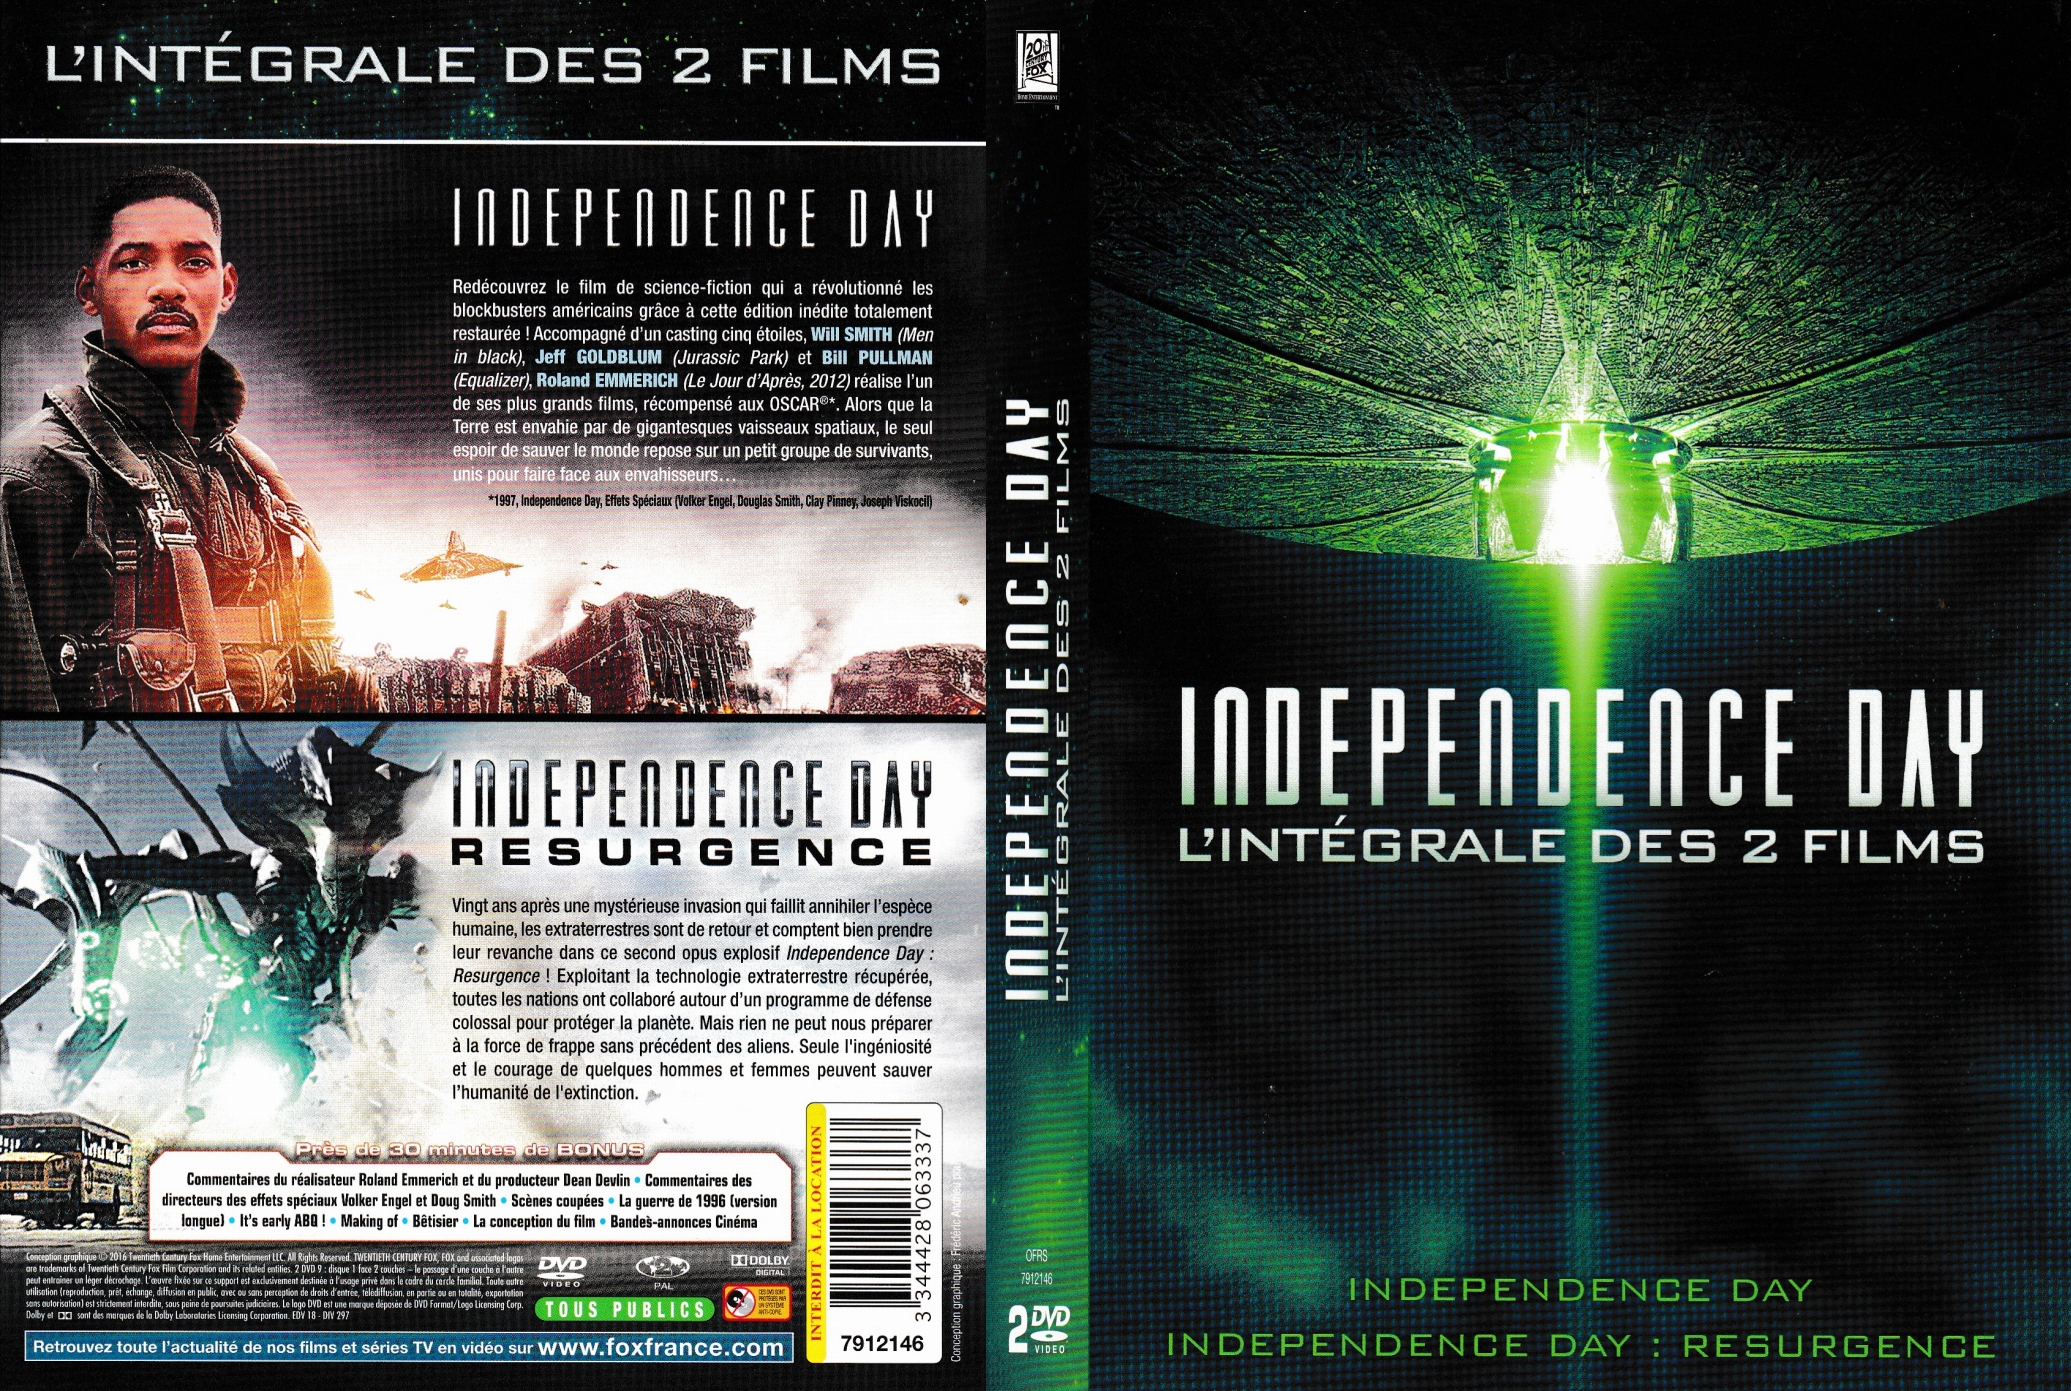 Jaquette DVD Independence Day L-integrale 1 & 2